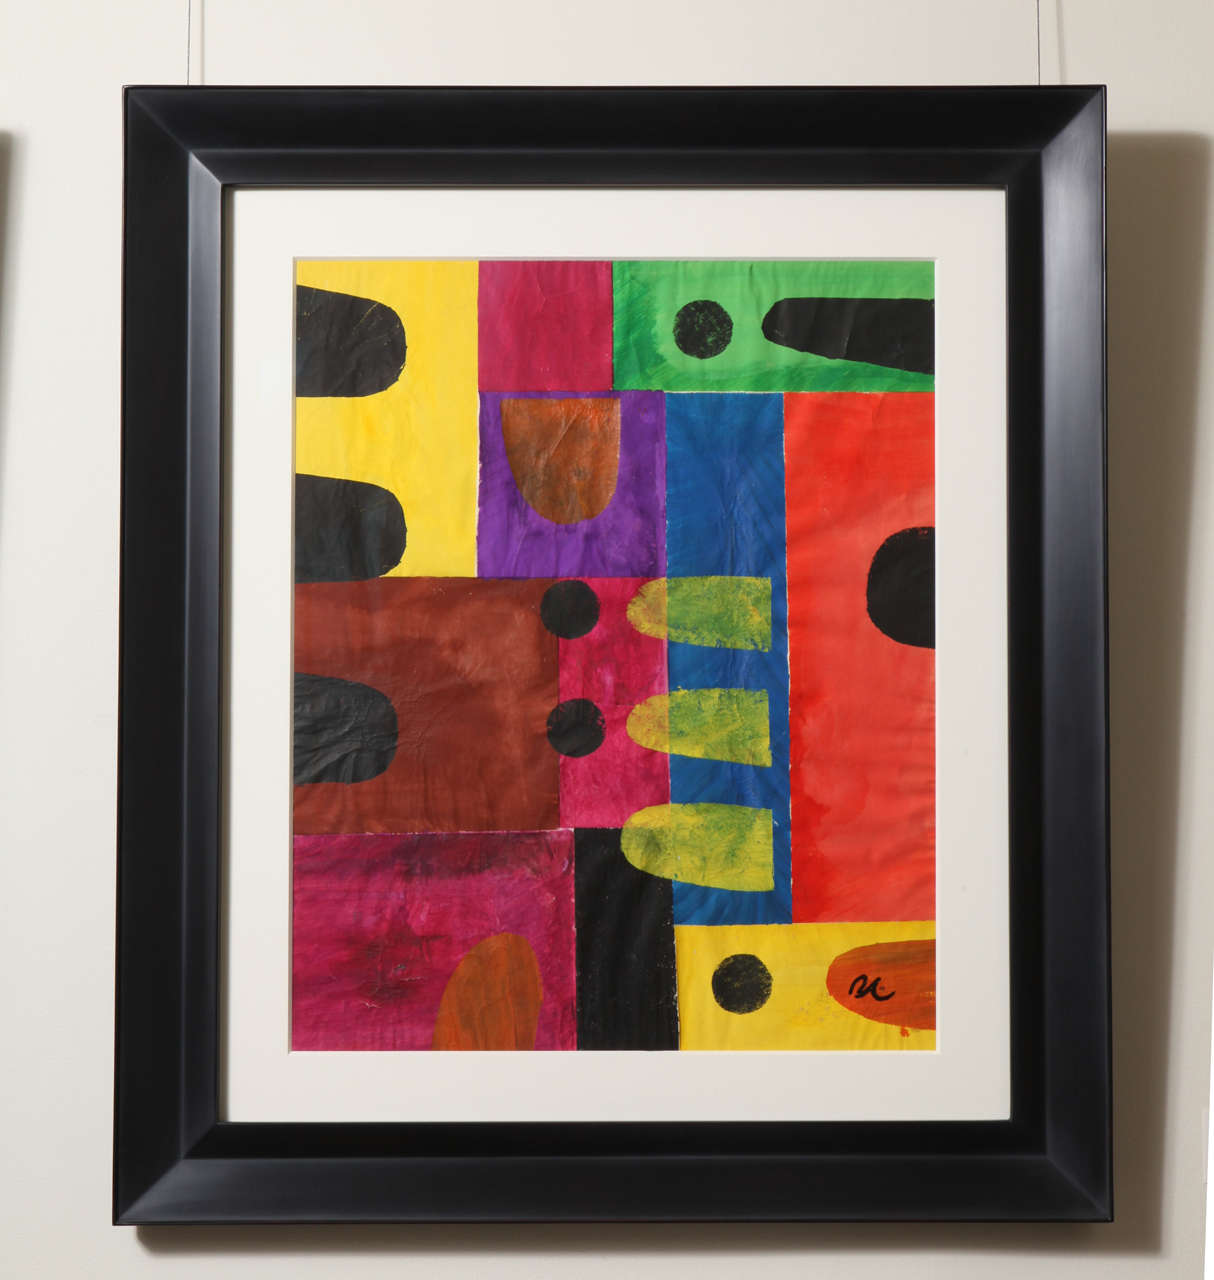 Measures: Image- 18 1/2” wide; 22 ½” high
Frame- 26 3/4” wide; 30 5/8” high

Custom framed with mat and museum glass.

Multicolored abstract geometric composition with horizontal forms with one rounded endand one square end along with